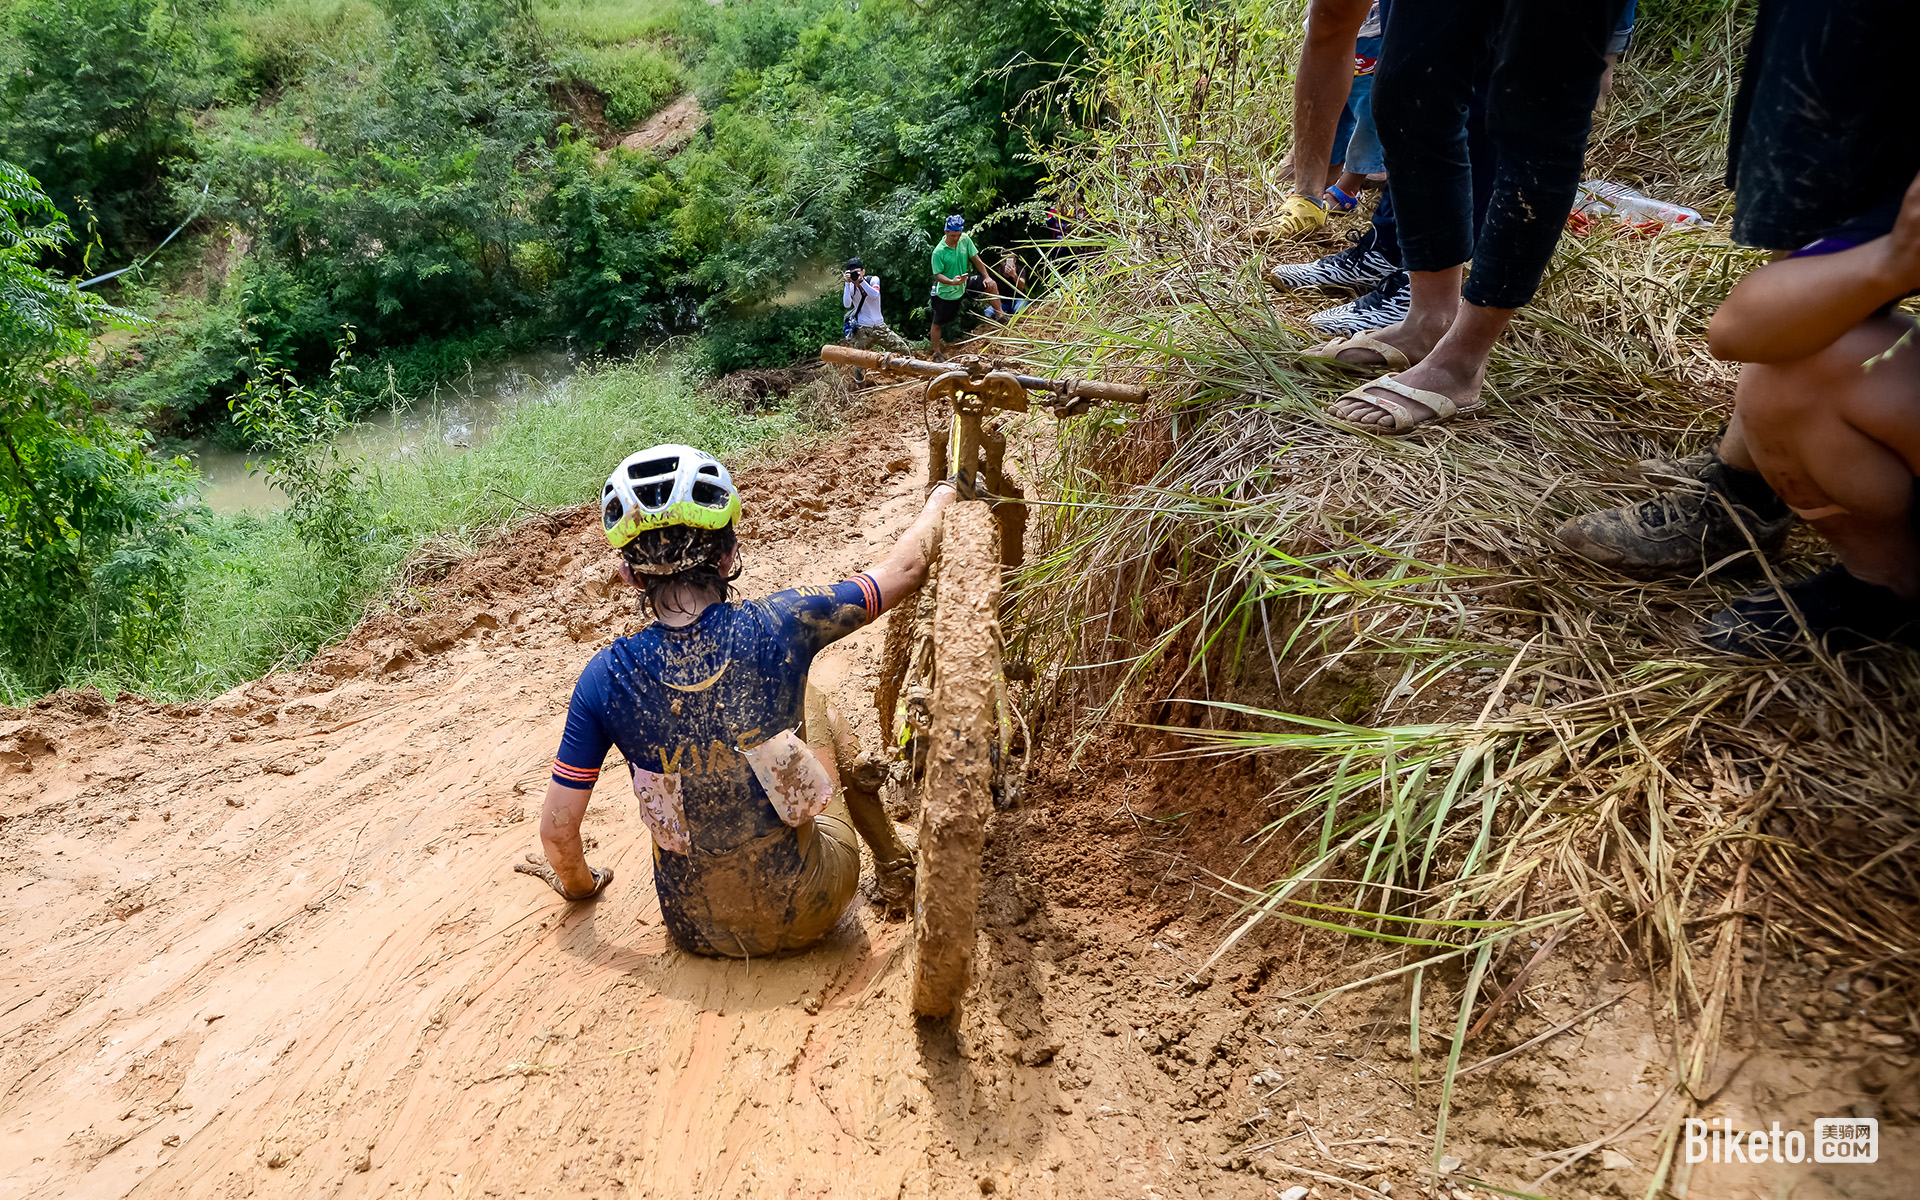 Kid Covered In Mud Becomes Internet’s Sign of Hope - WeHaveKids News